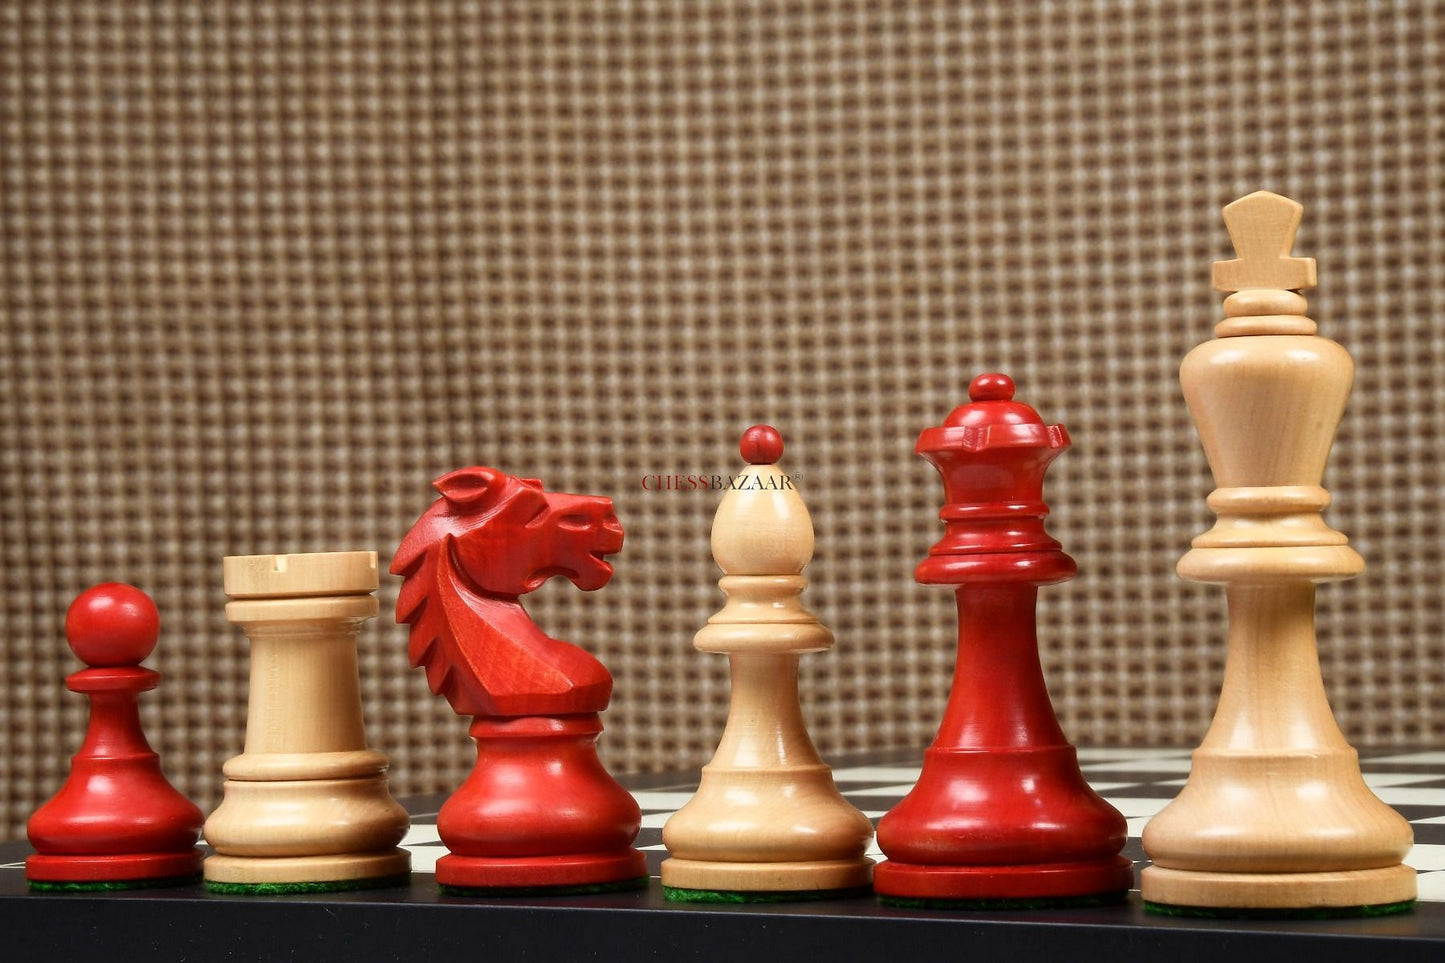 Special Edition Reproduced Vintage 1950's Circa Bohemia Staunton Series German Chess Pieces in Stained Crimson Boxwood - 3.89" King